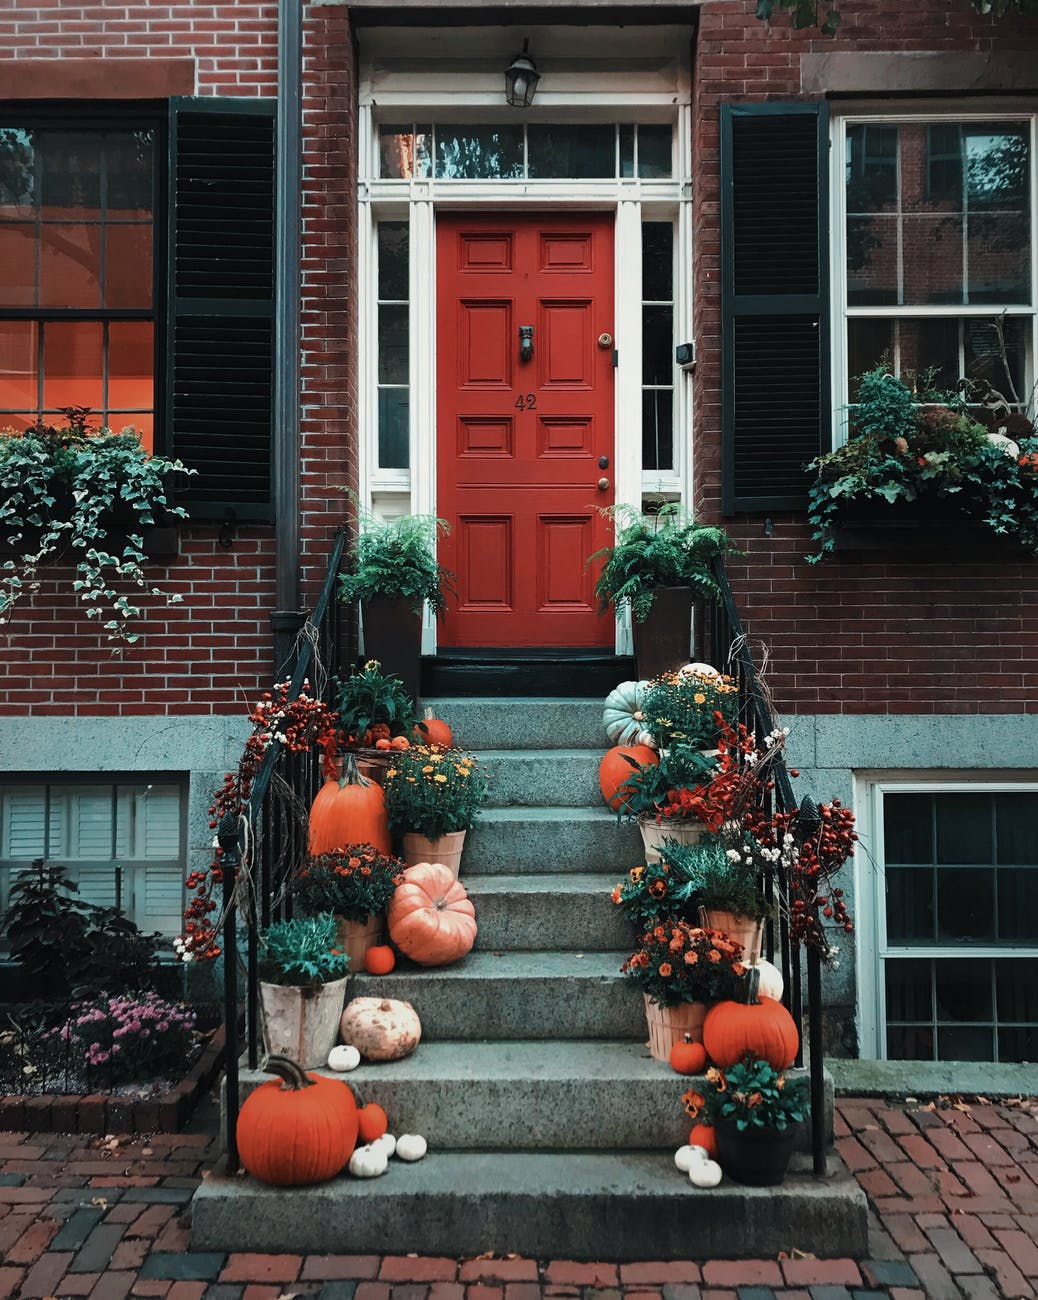 How to bring a touch of autumn into your home this season